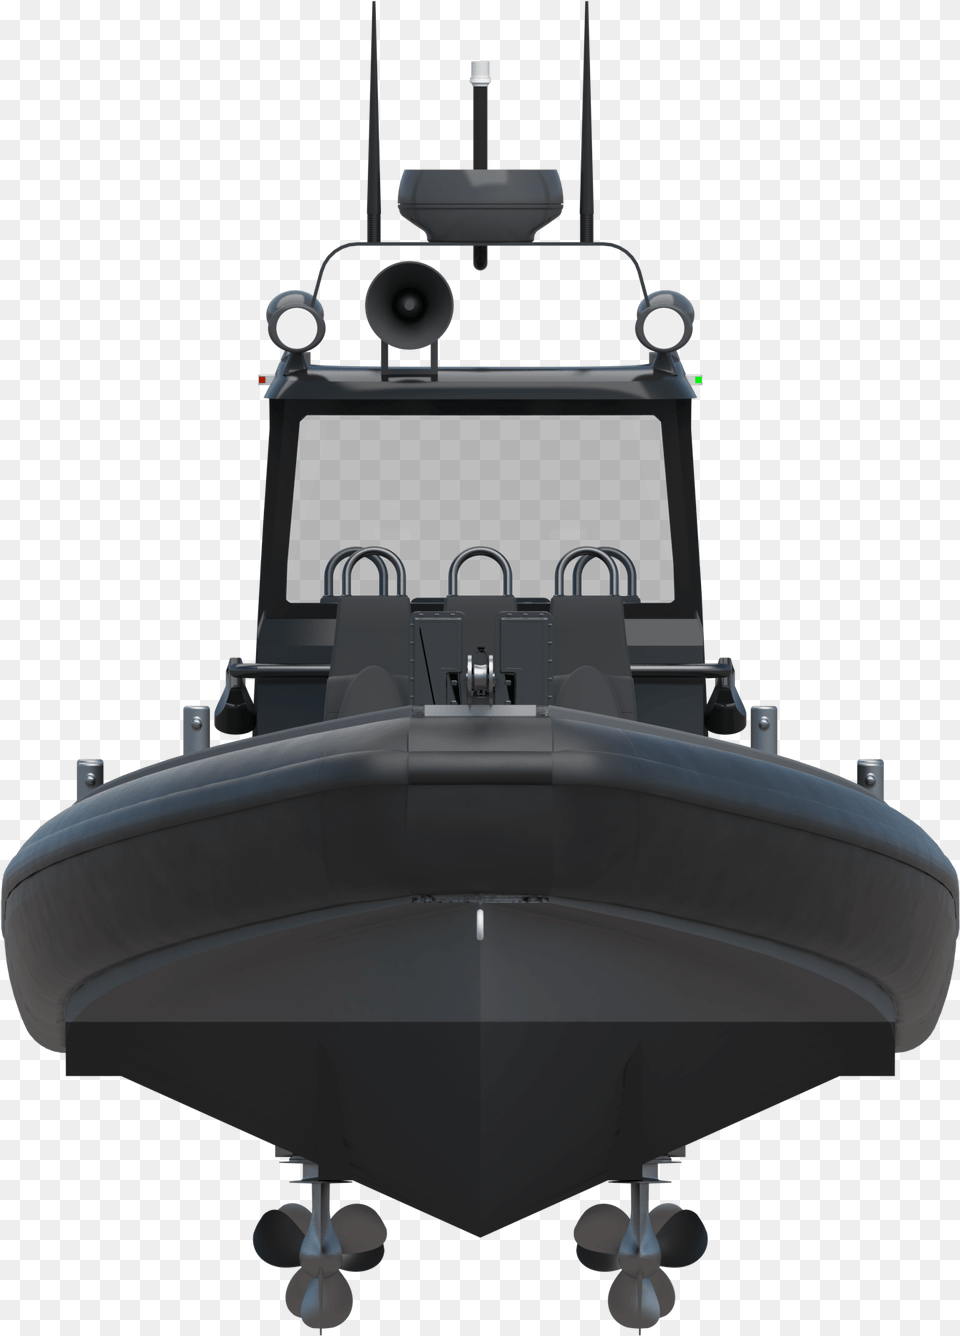 Rigid Hulled Inflatable Boat, Chandelier, Lamp, Transportation, Vehicle Free Transparent Png